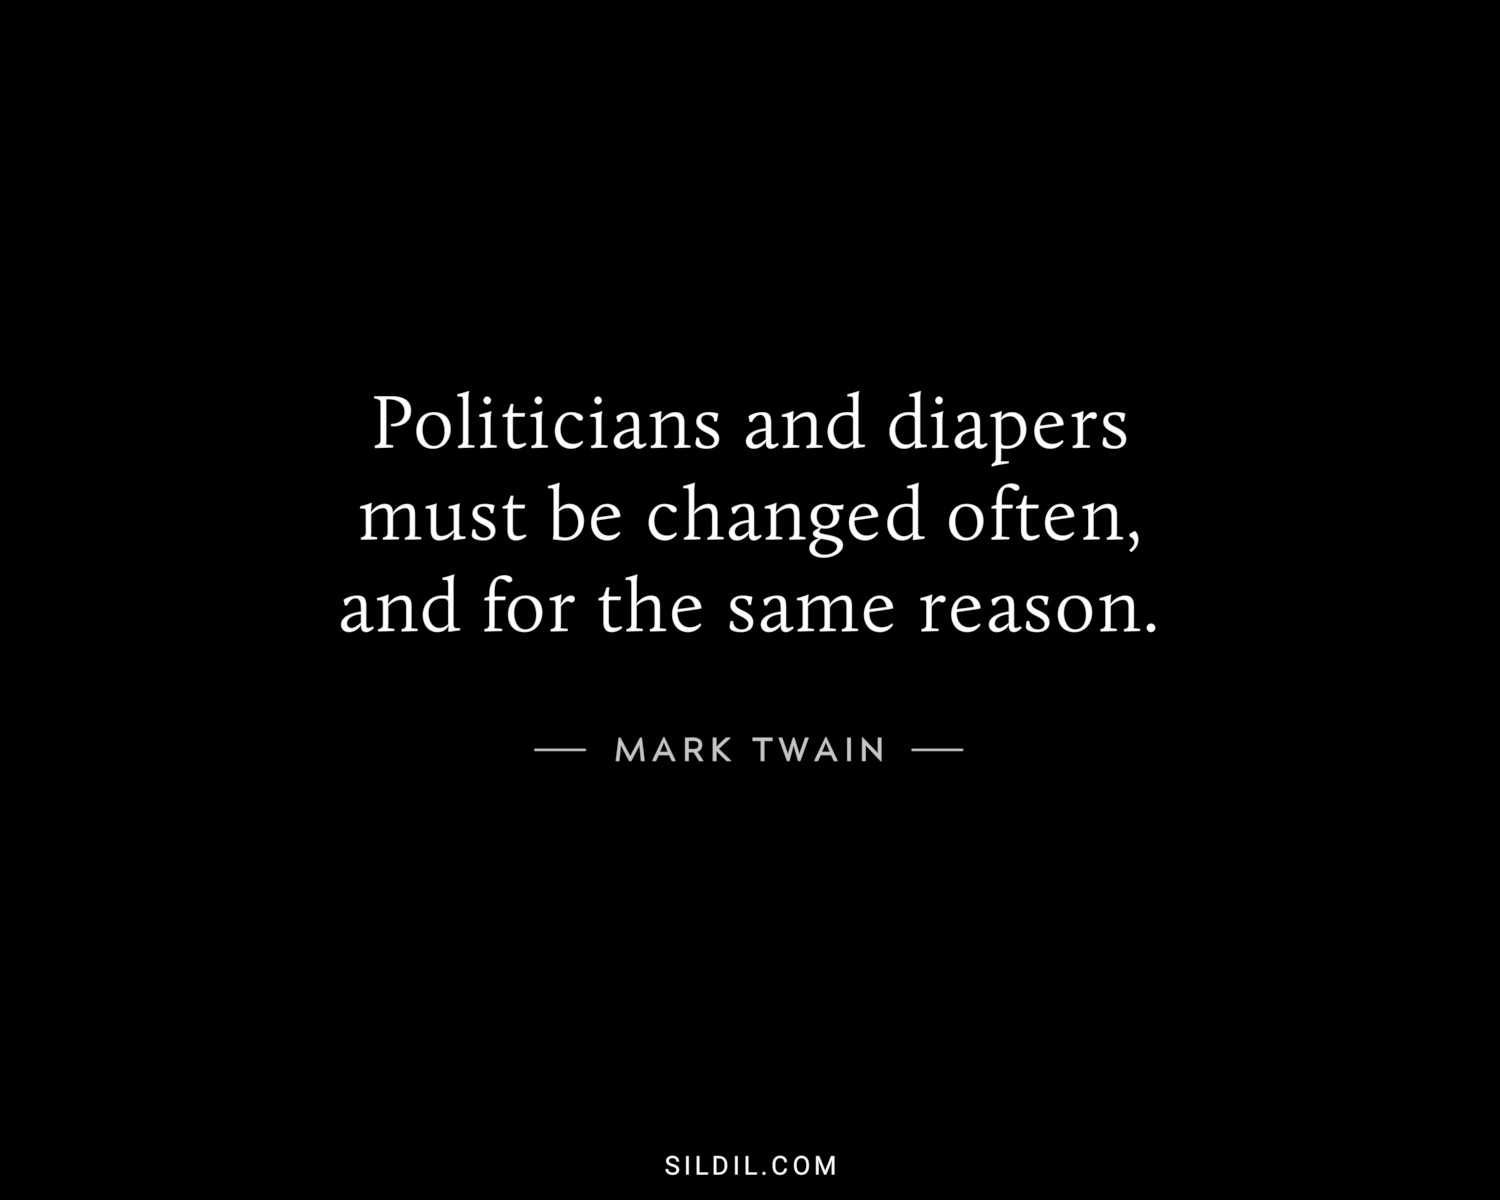 Politicians and diapers must be changed often, and for the same reason.